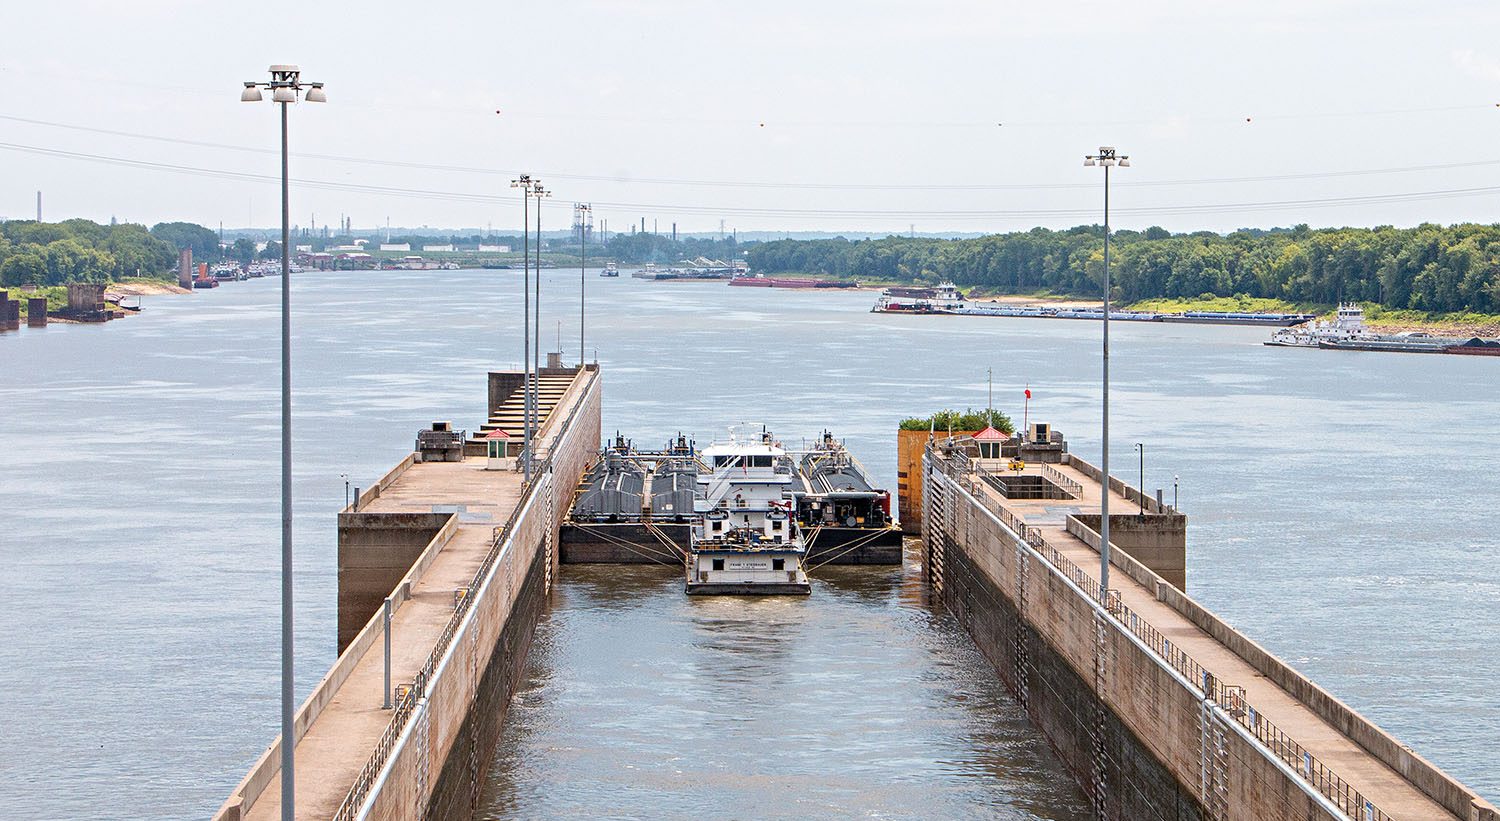 As the new year begins, the inland barge and towing industry looks ahead to some interesting challenges. (WJ file photo by John Shoulberg)